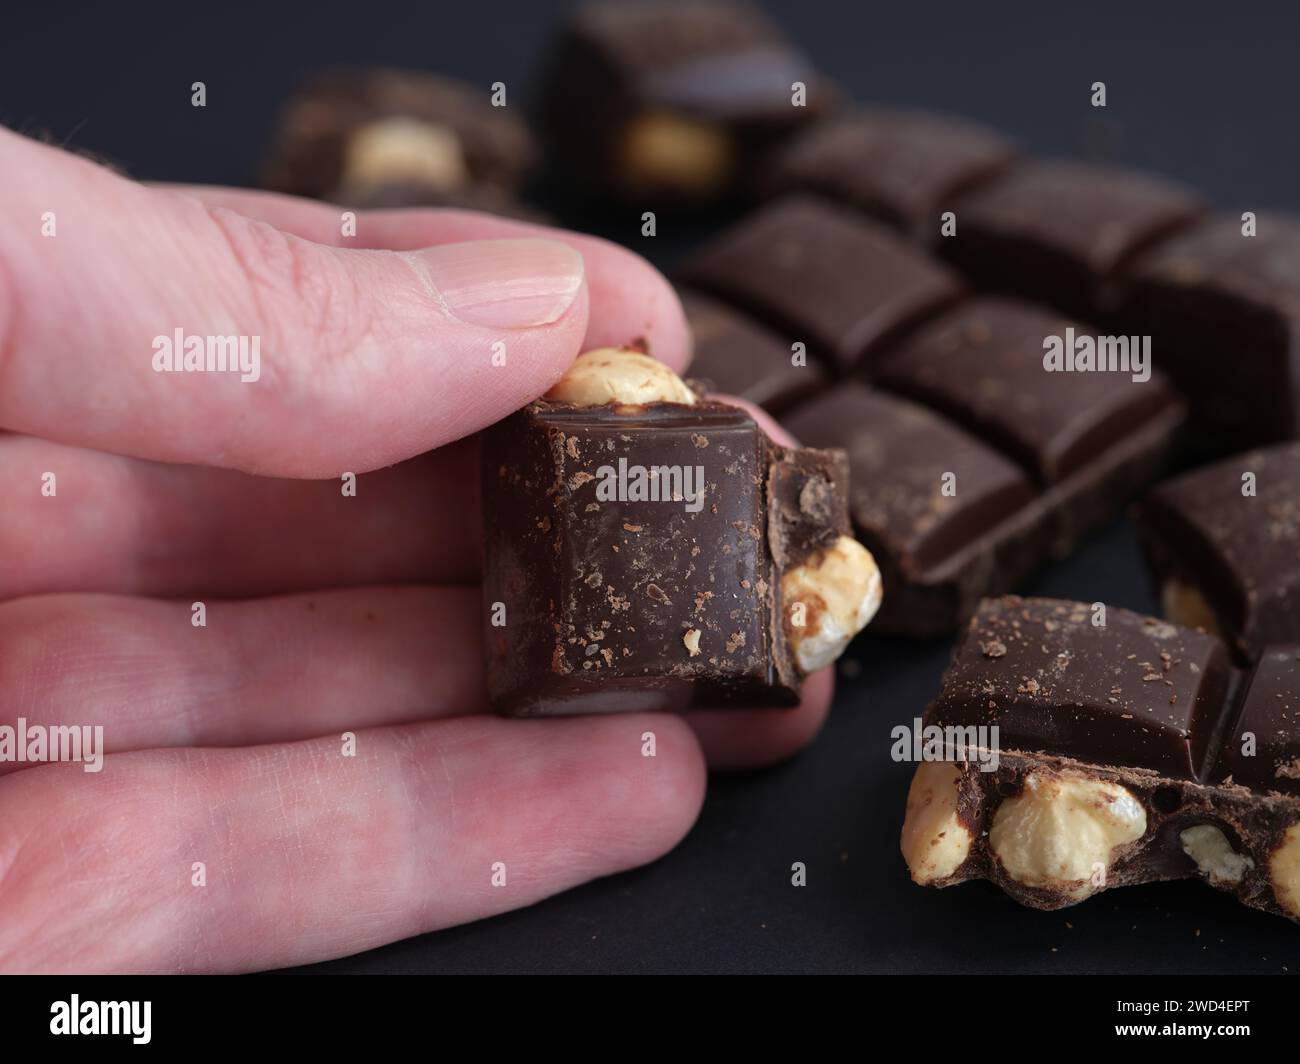 A man holding a piece of dark chocolate with hazelnuts in his hand. Close up. Stock Photo